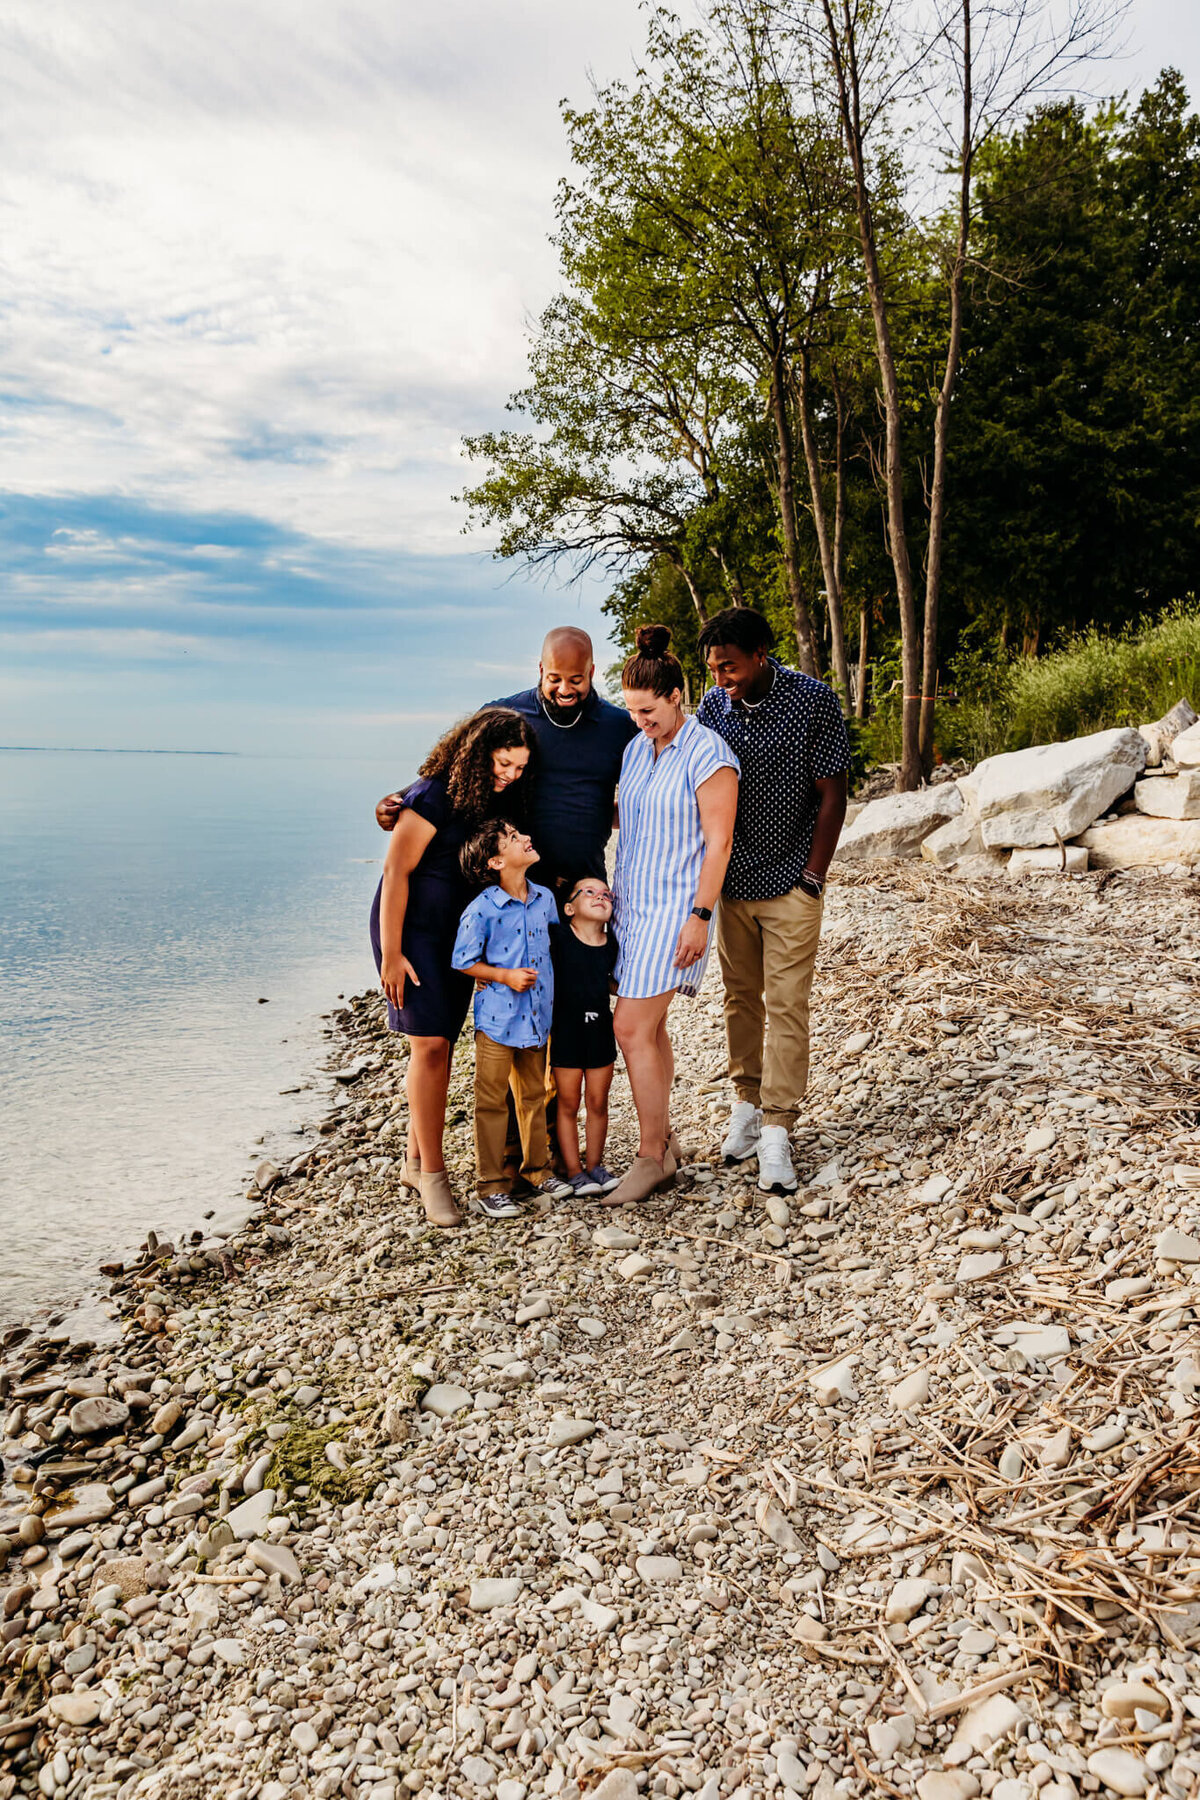 beautiful family laughing together on a rocky beach for photo session